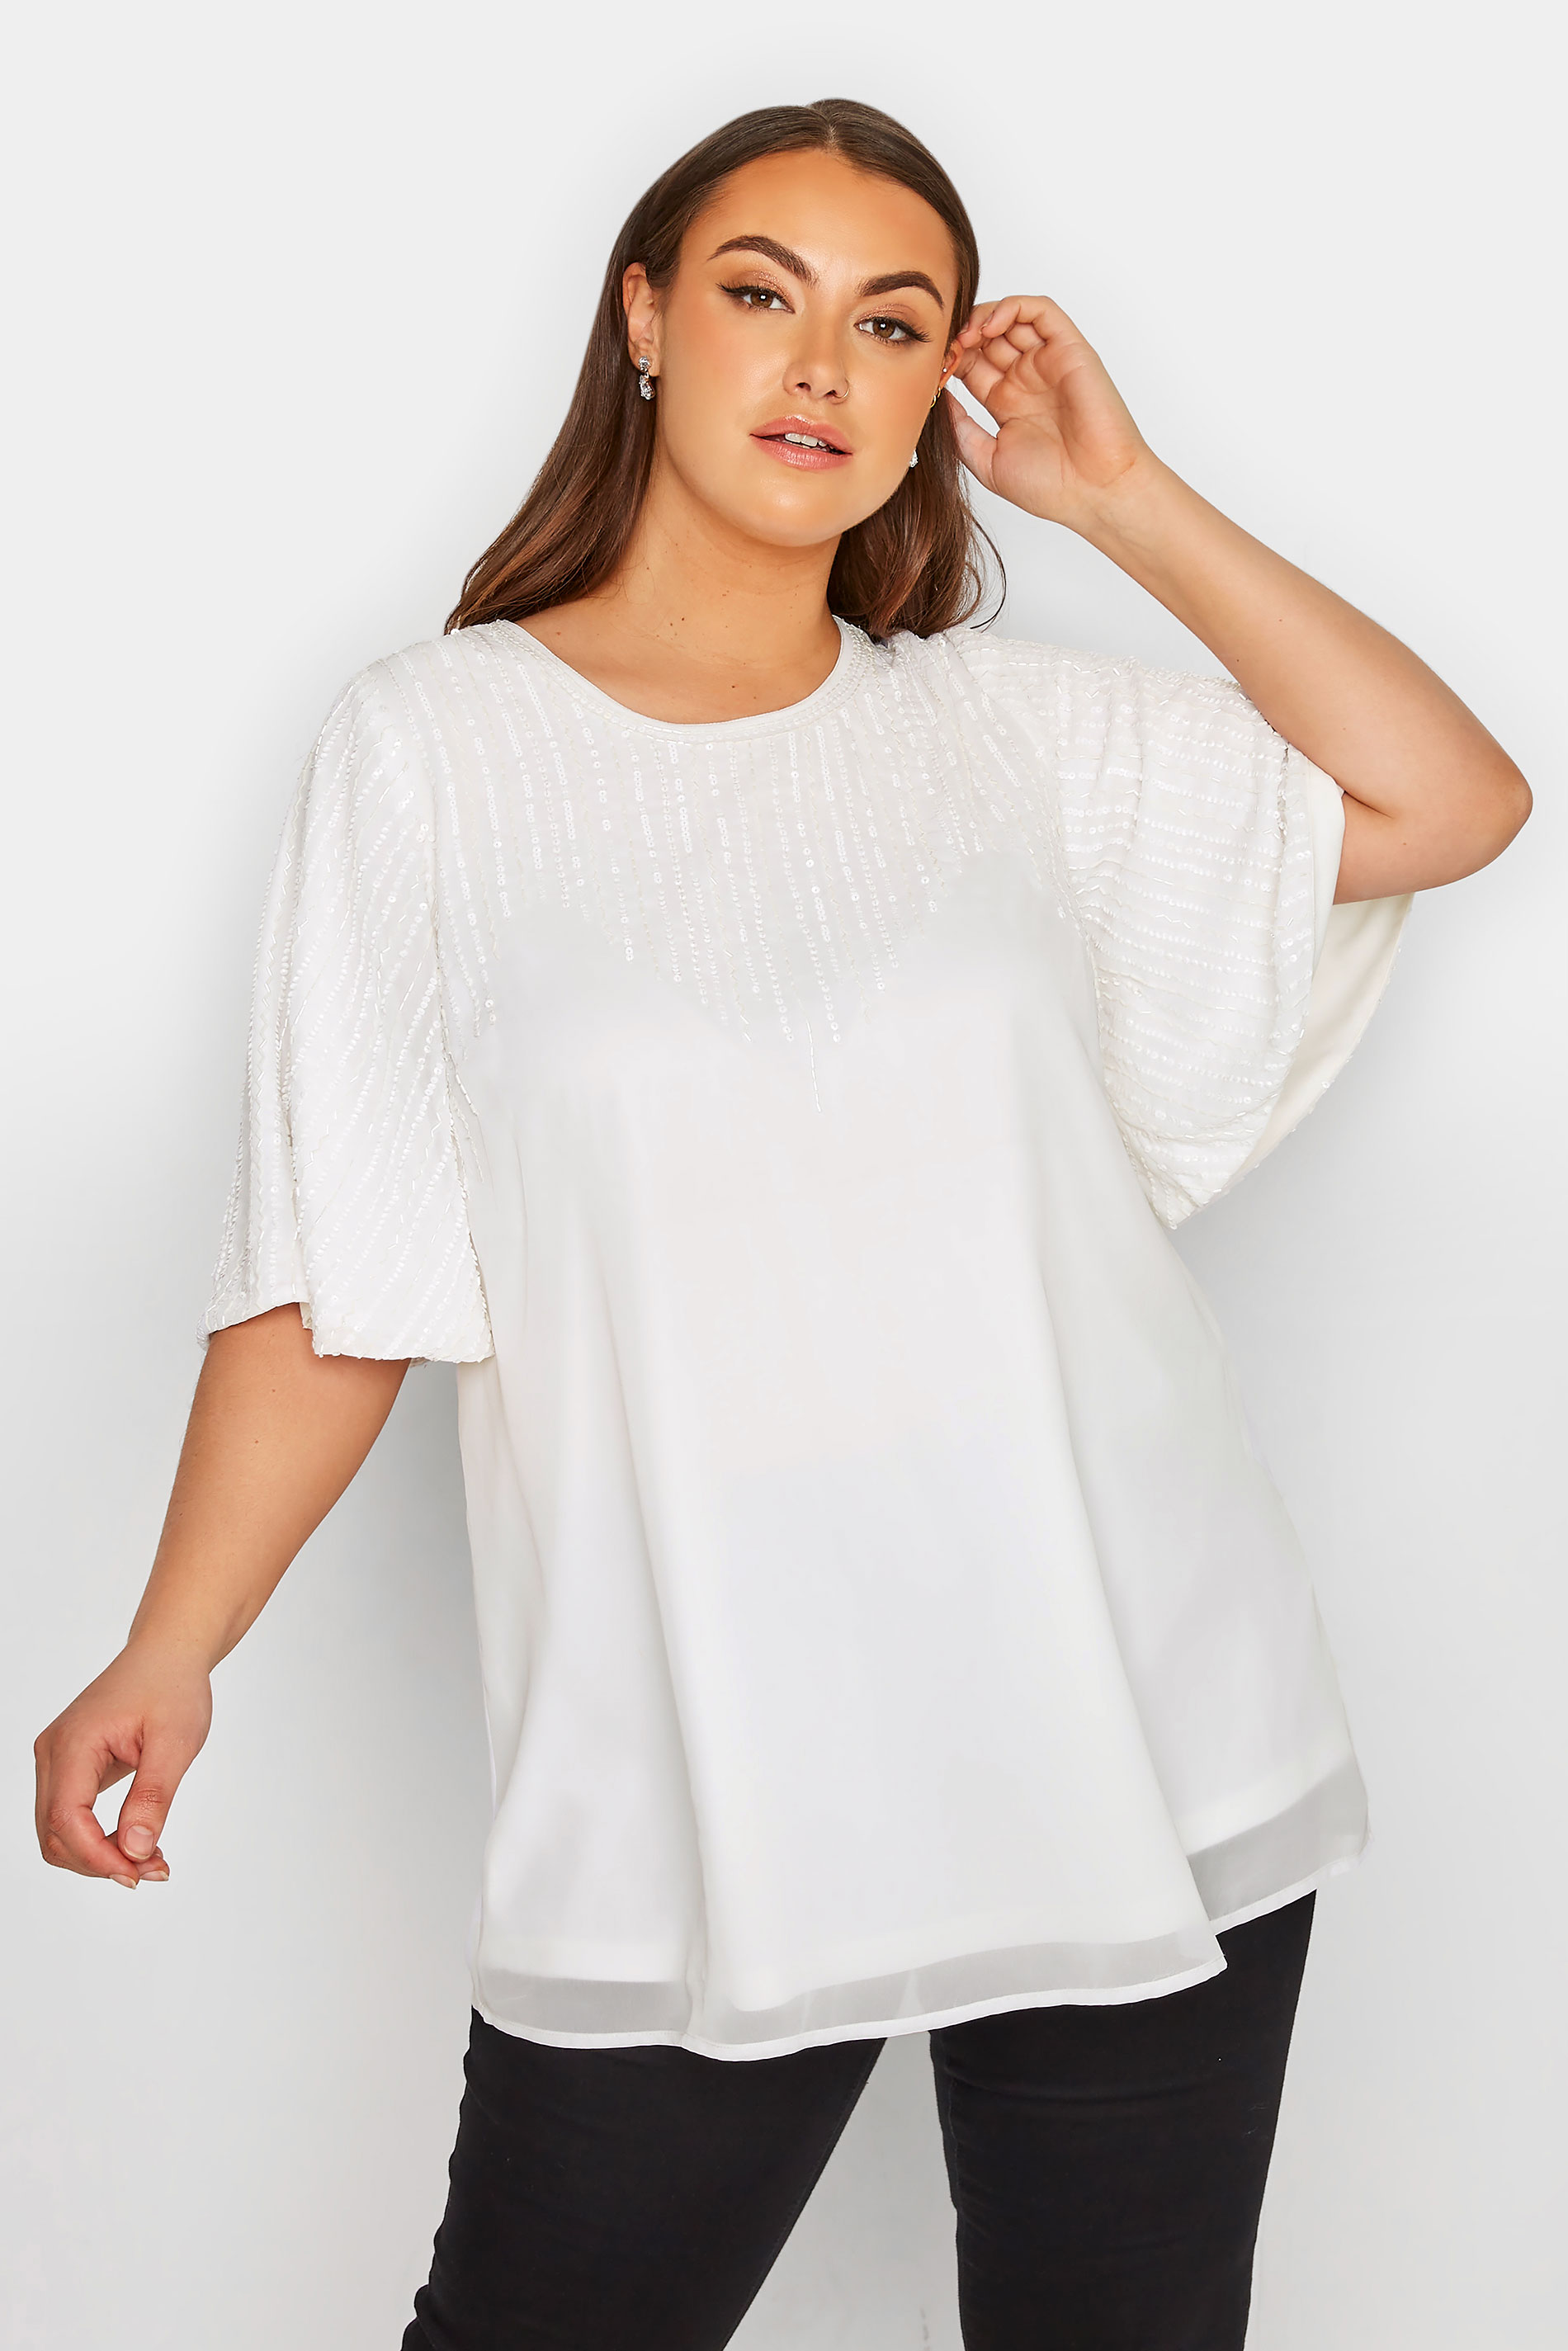 LUXE Plus Size White Sequin Hand Embellished Sweetheart Top | Yours Clothing  1